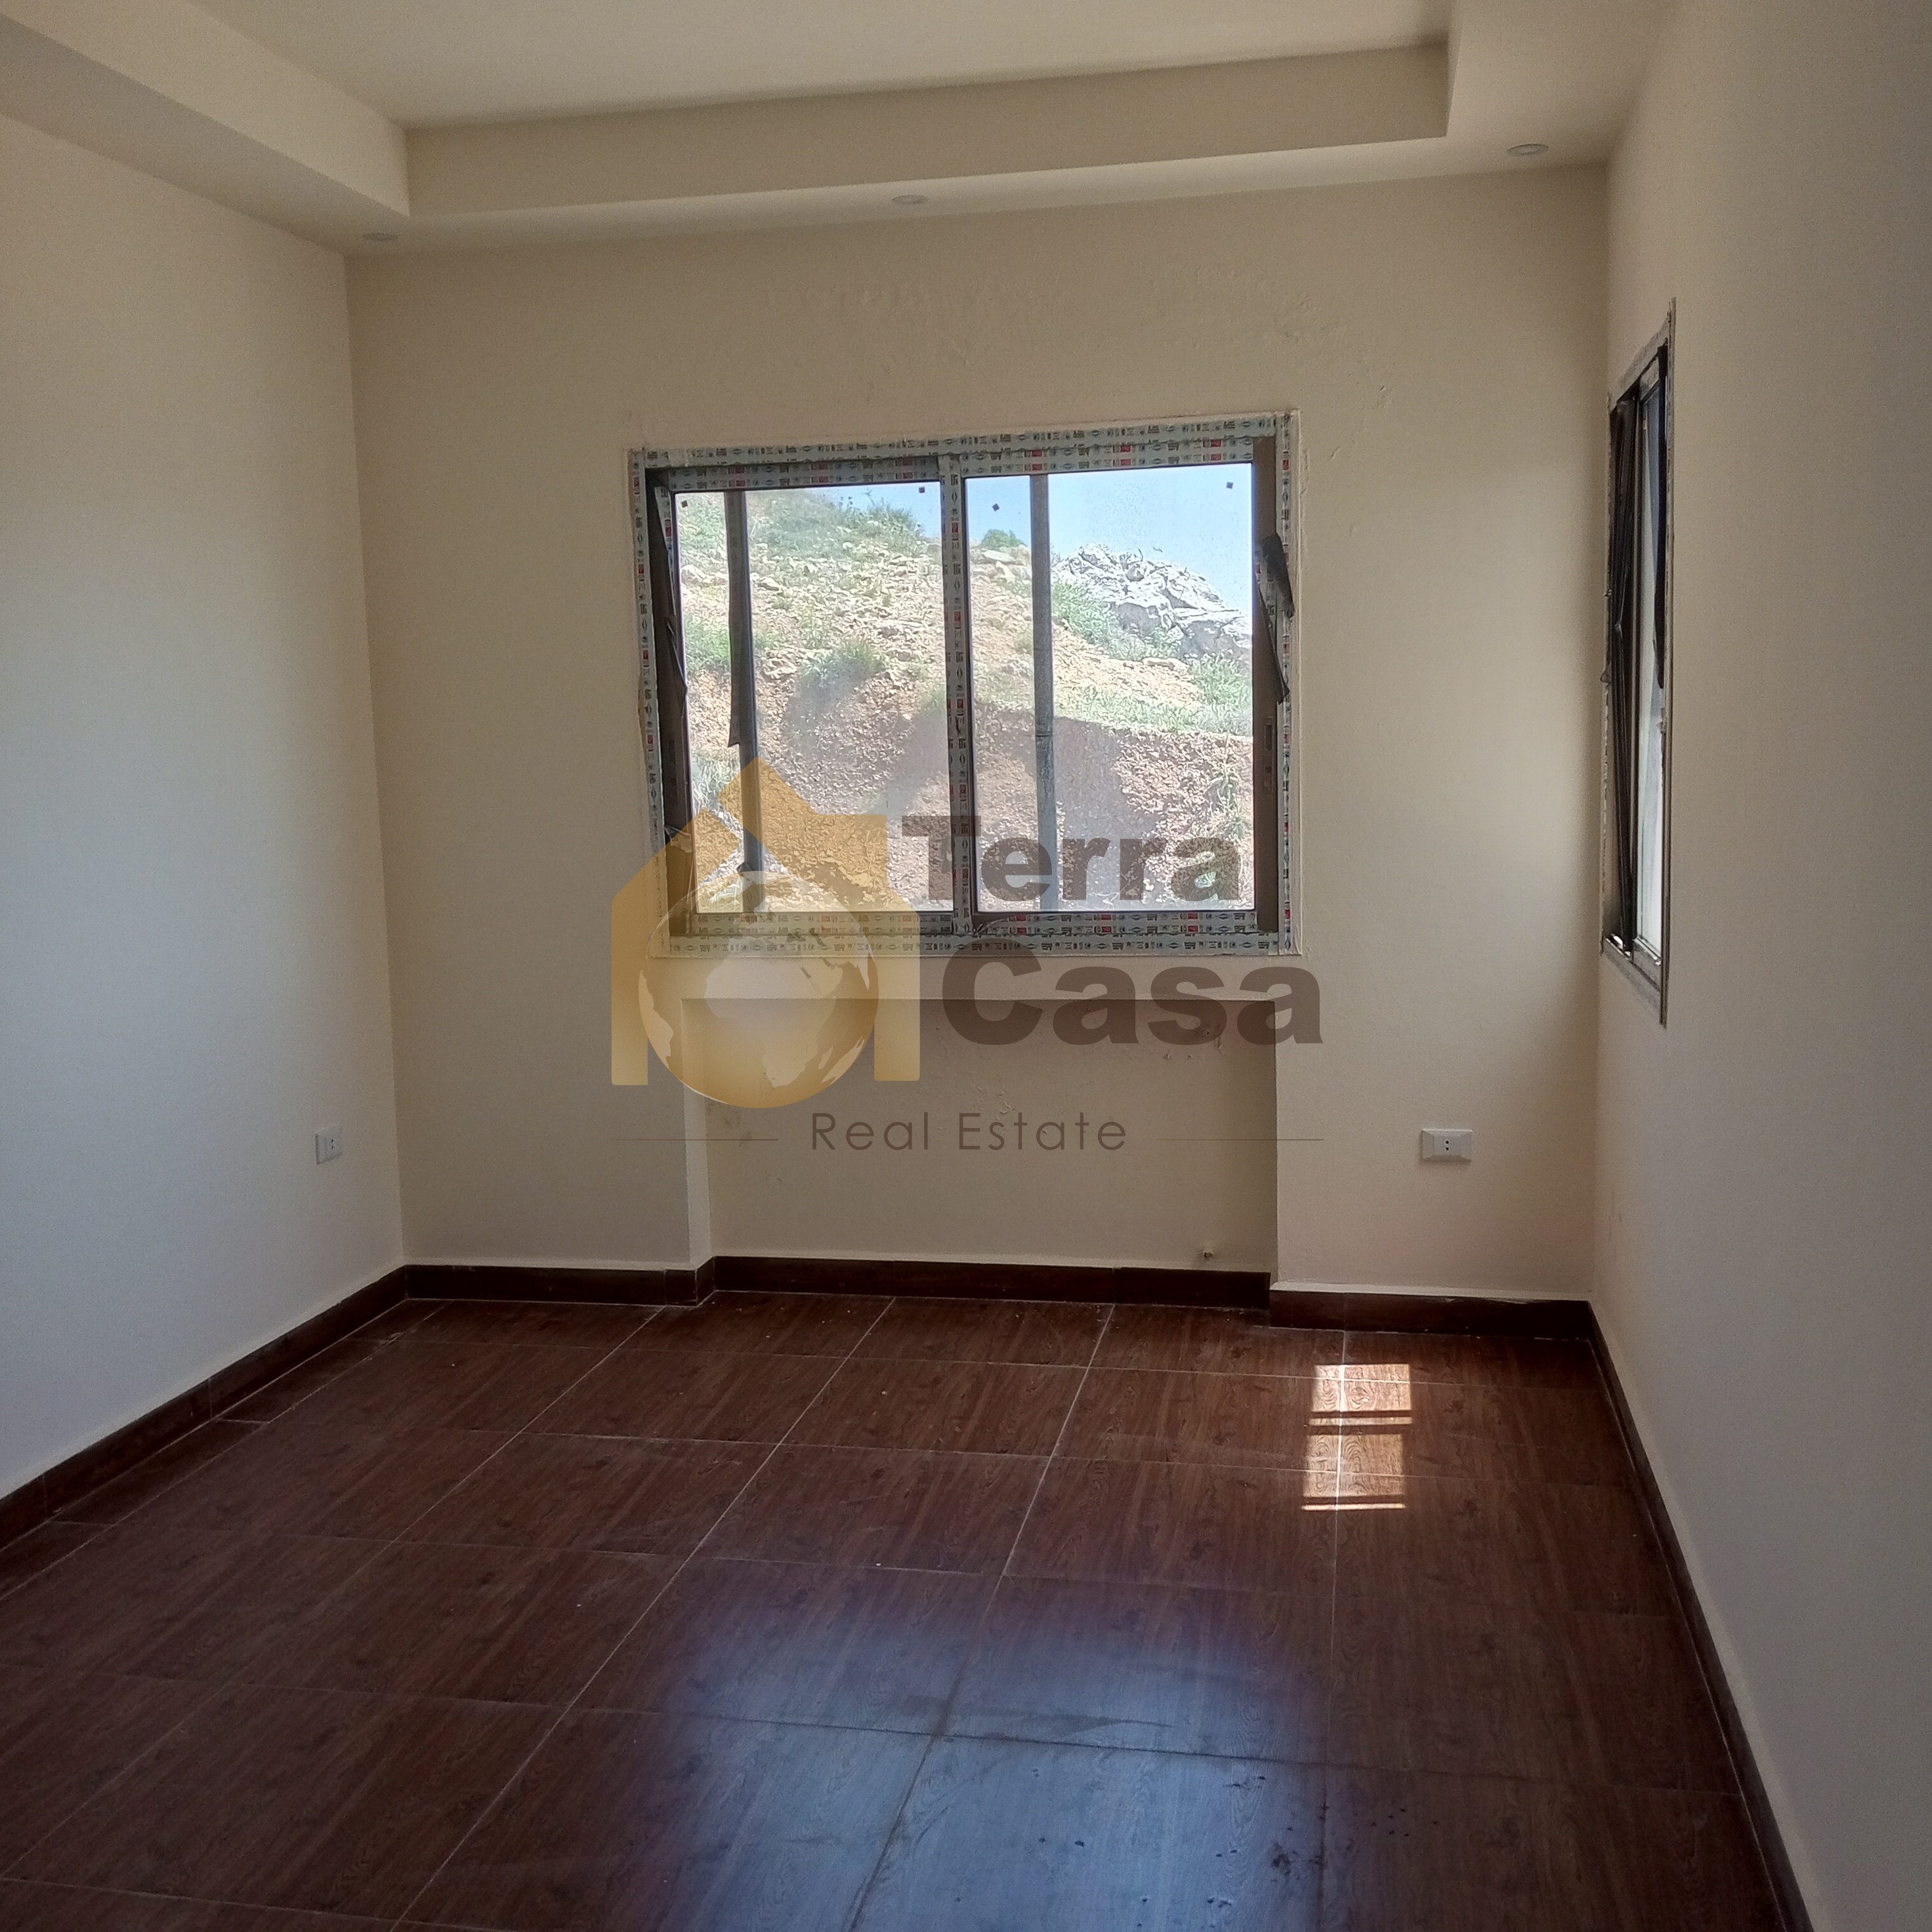 Apartment for sale in Qoub Elias brand new. Ref#993